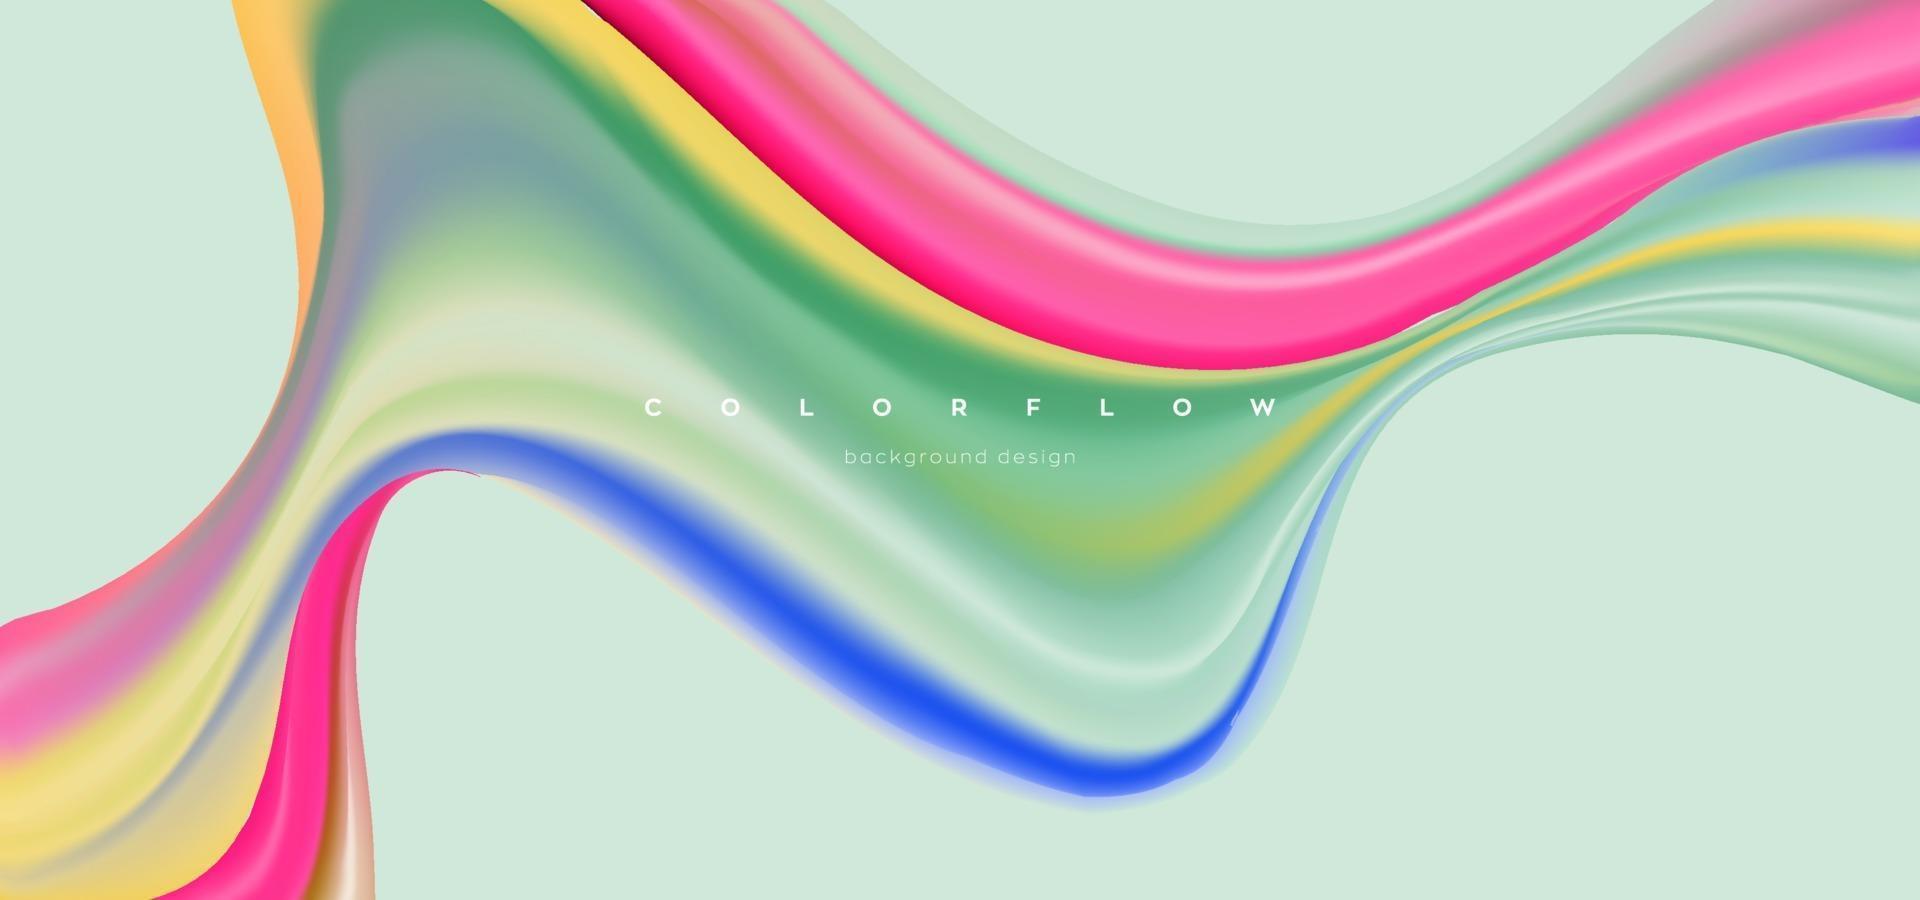 Abstract colorful fluid background design vector